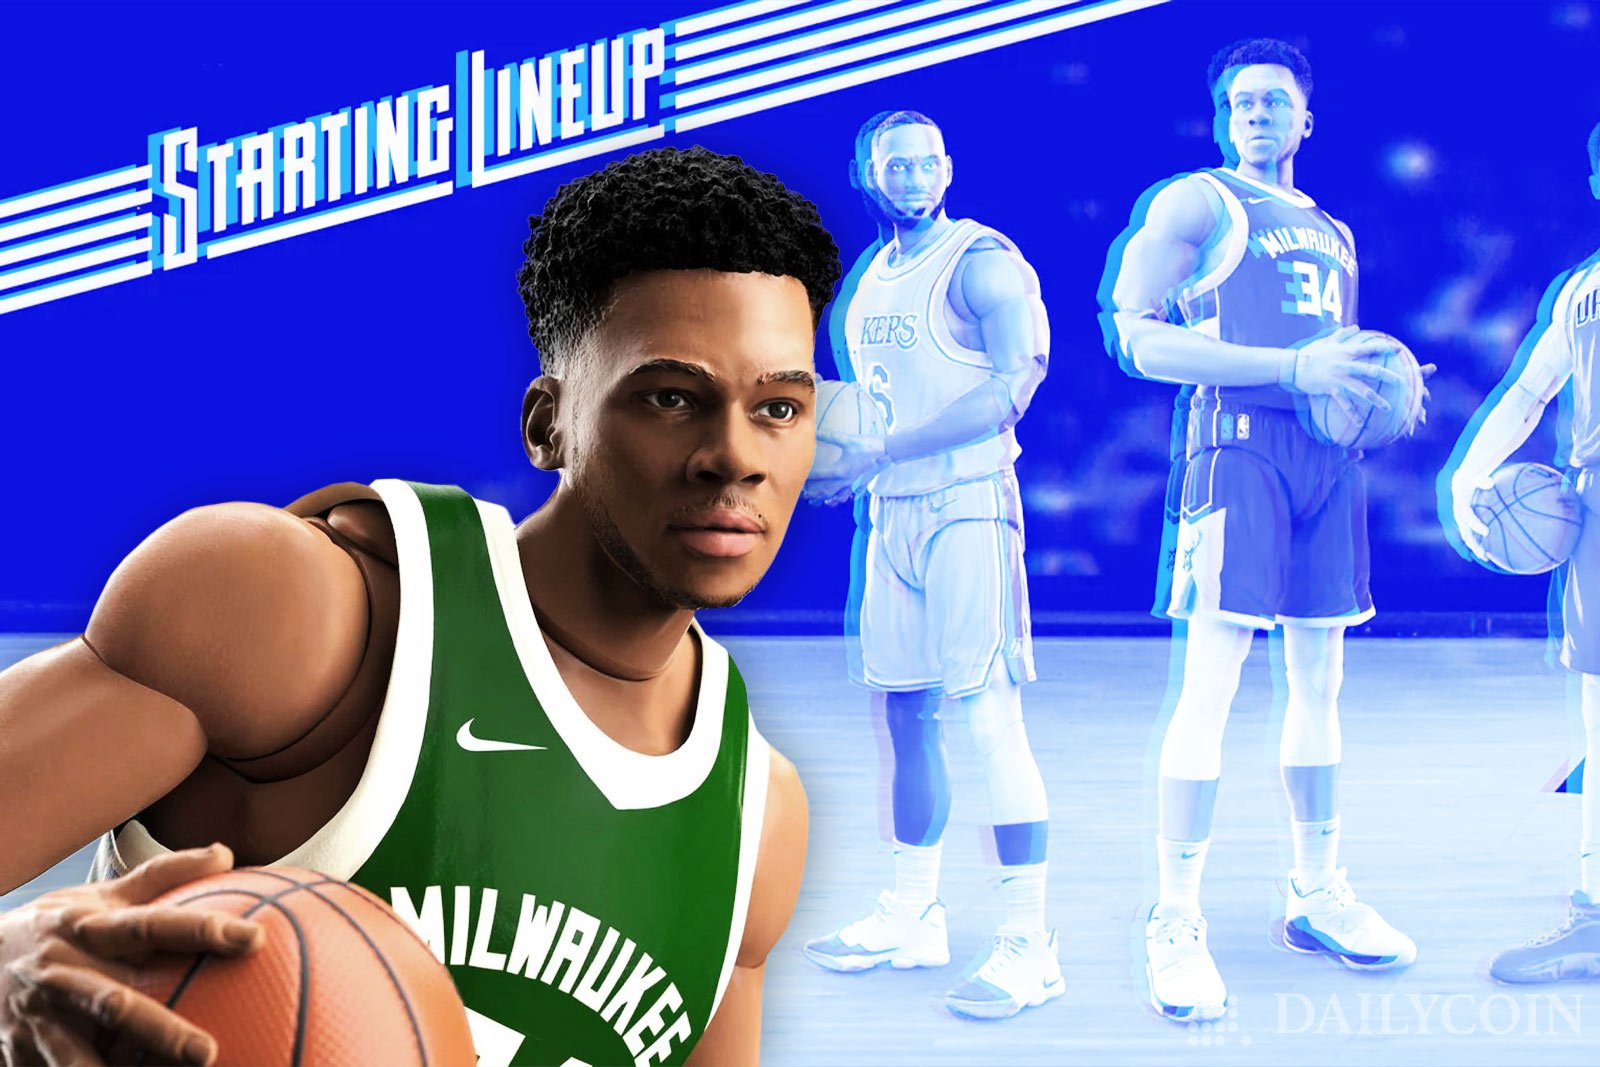 Hasbro Starting Lineup Drops NBA Aciton Figures With NFT Trading Cards